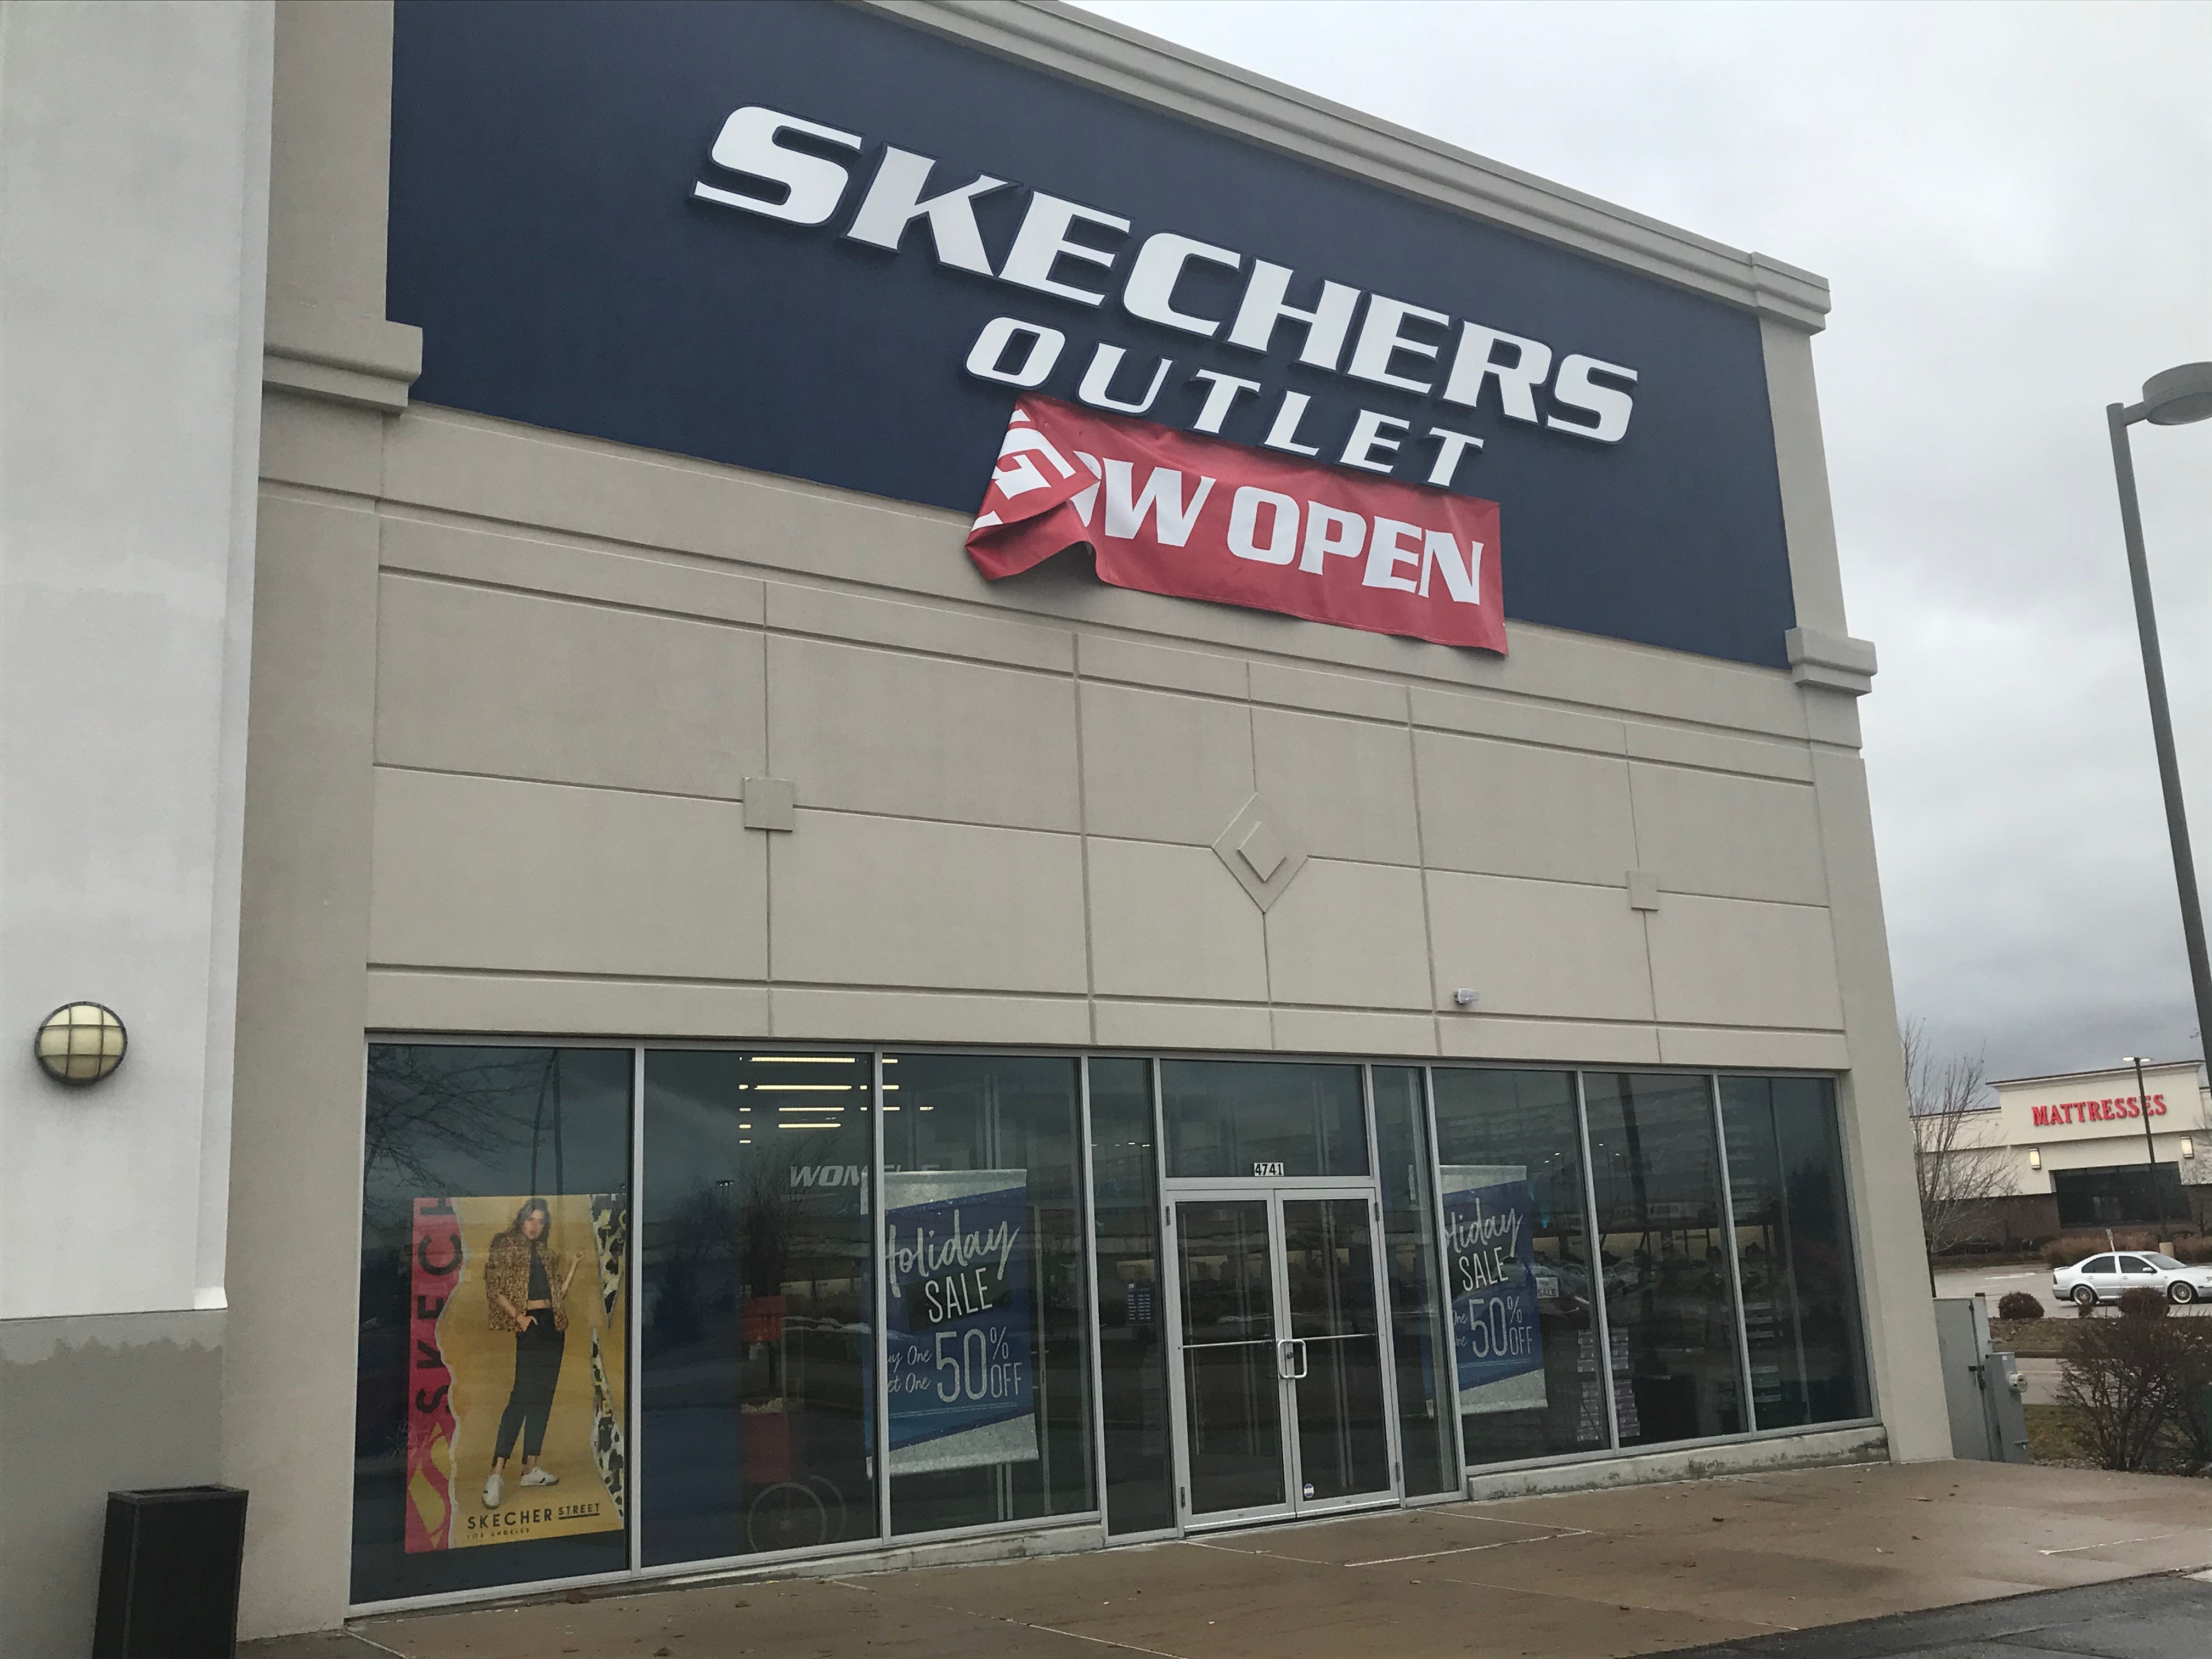 skechers outlet offers